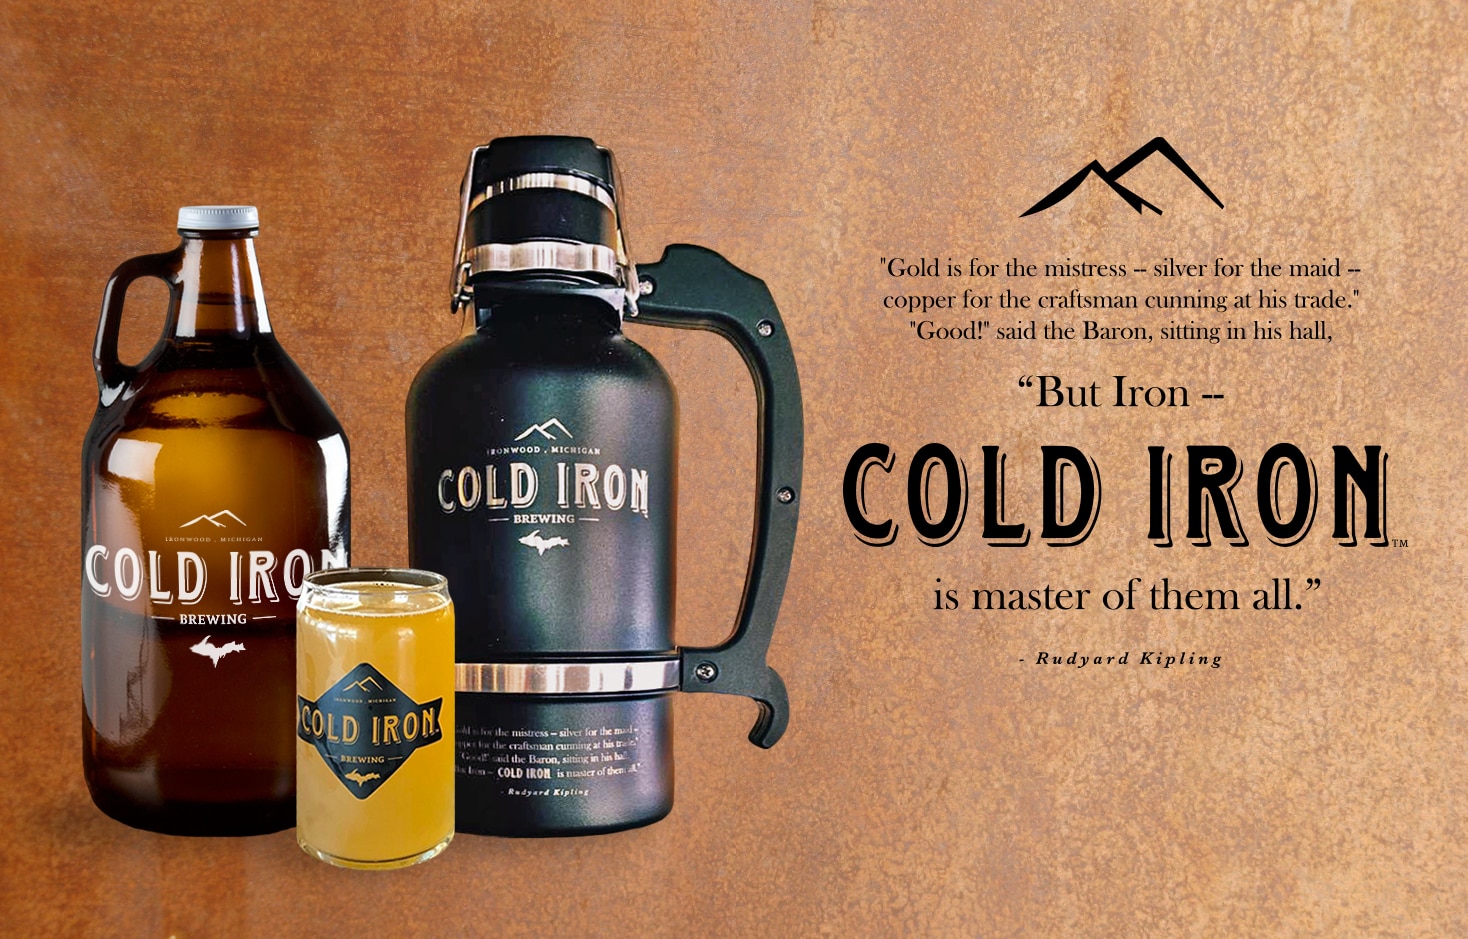 Cold Iron Brewing